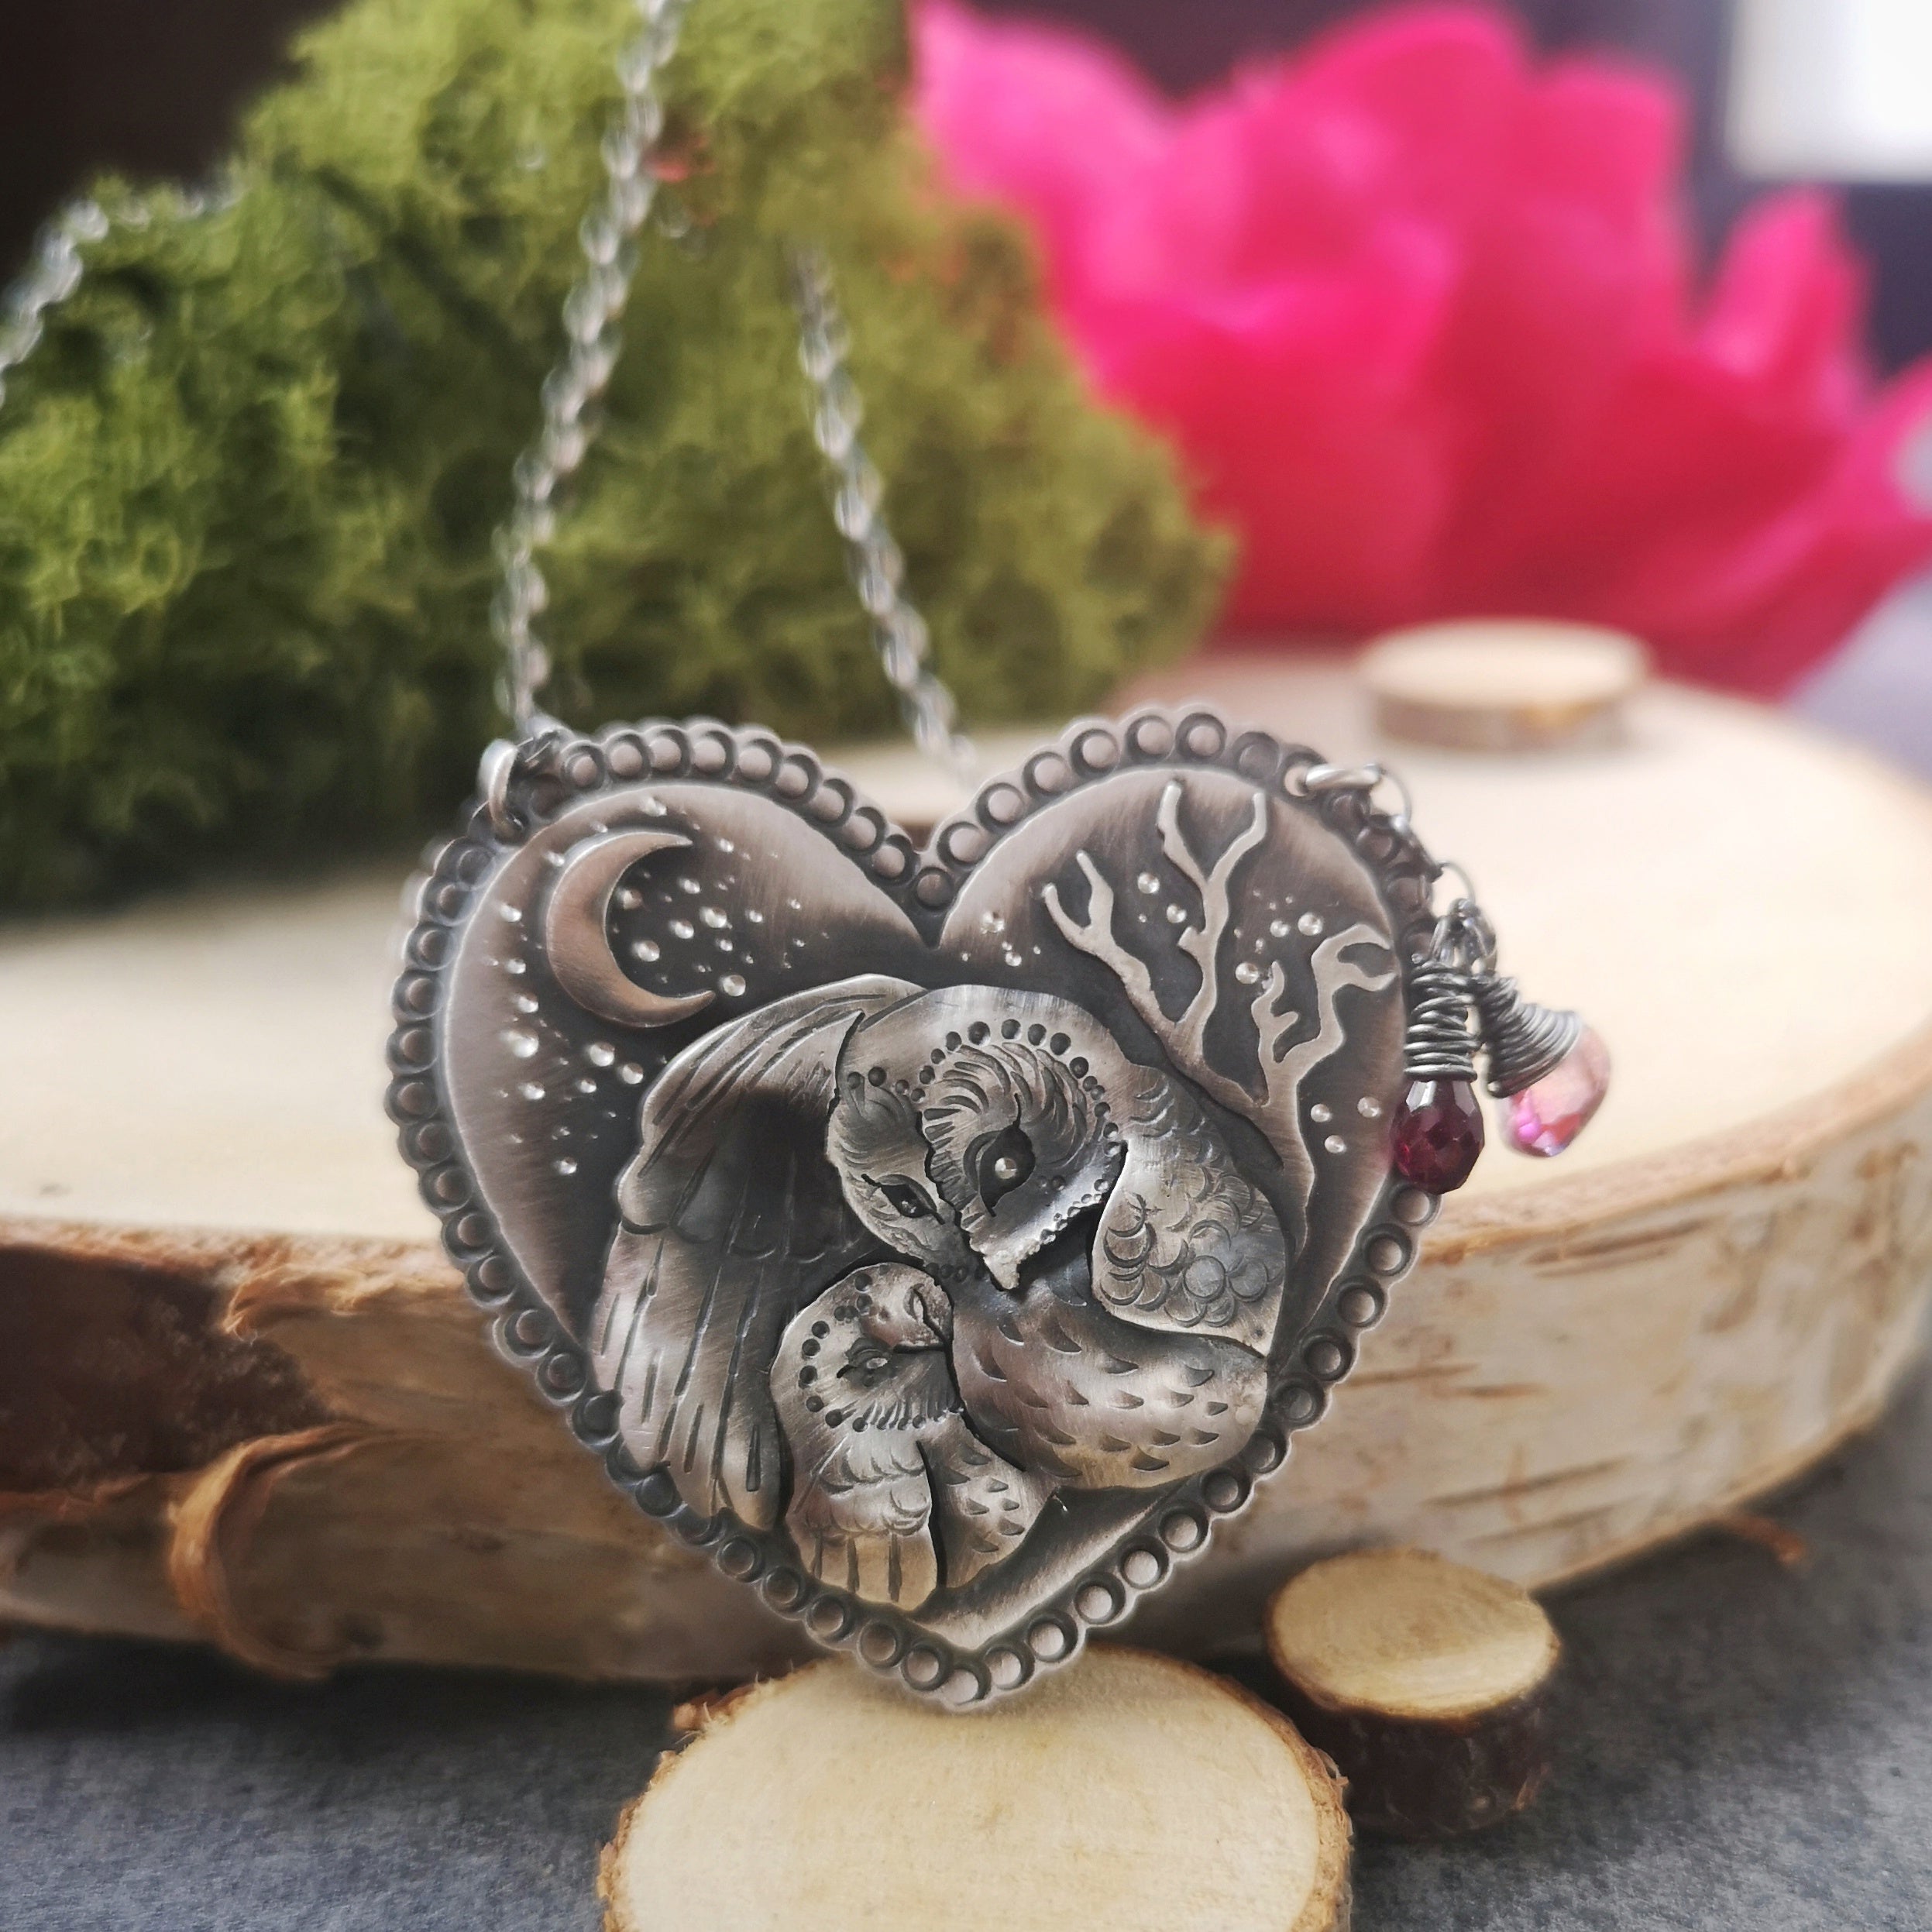 The Mother's Love Necklace - Mama & Baby Owl